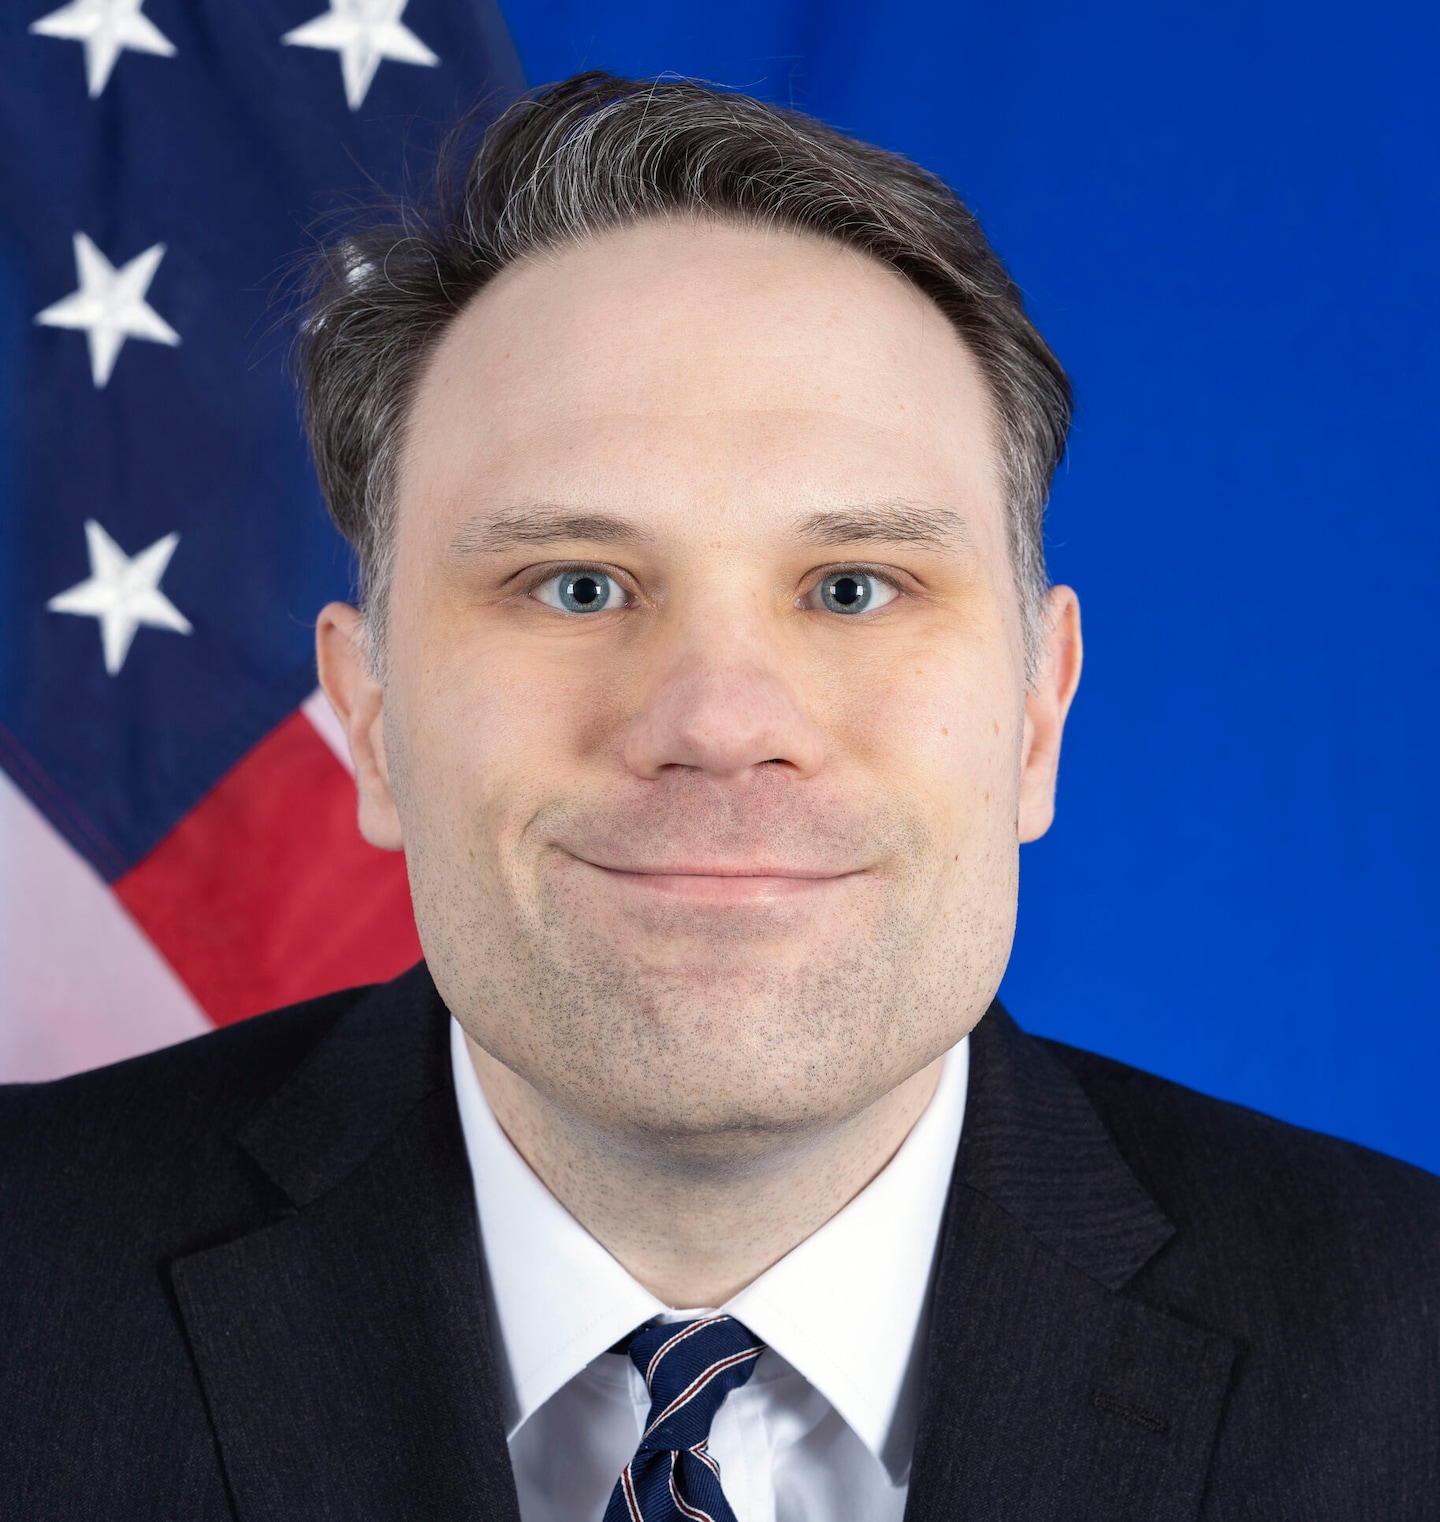 Andrew Miller, State Department expert on Israel-Palestine, resigns amid Gaza war